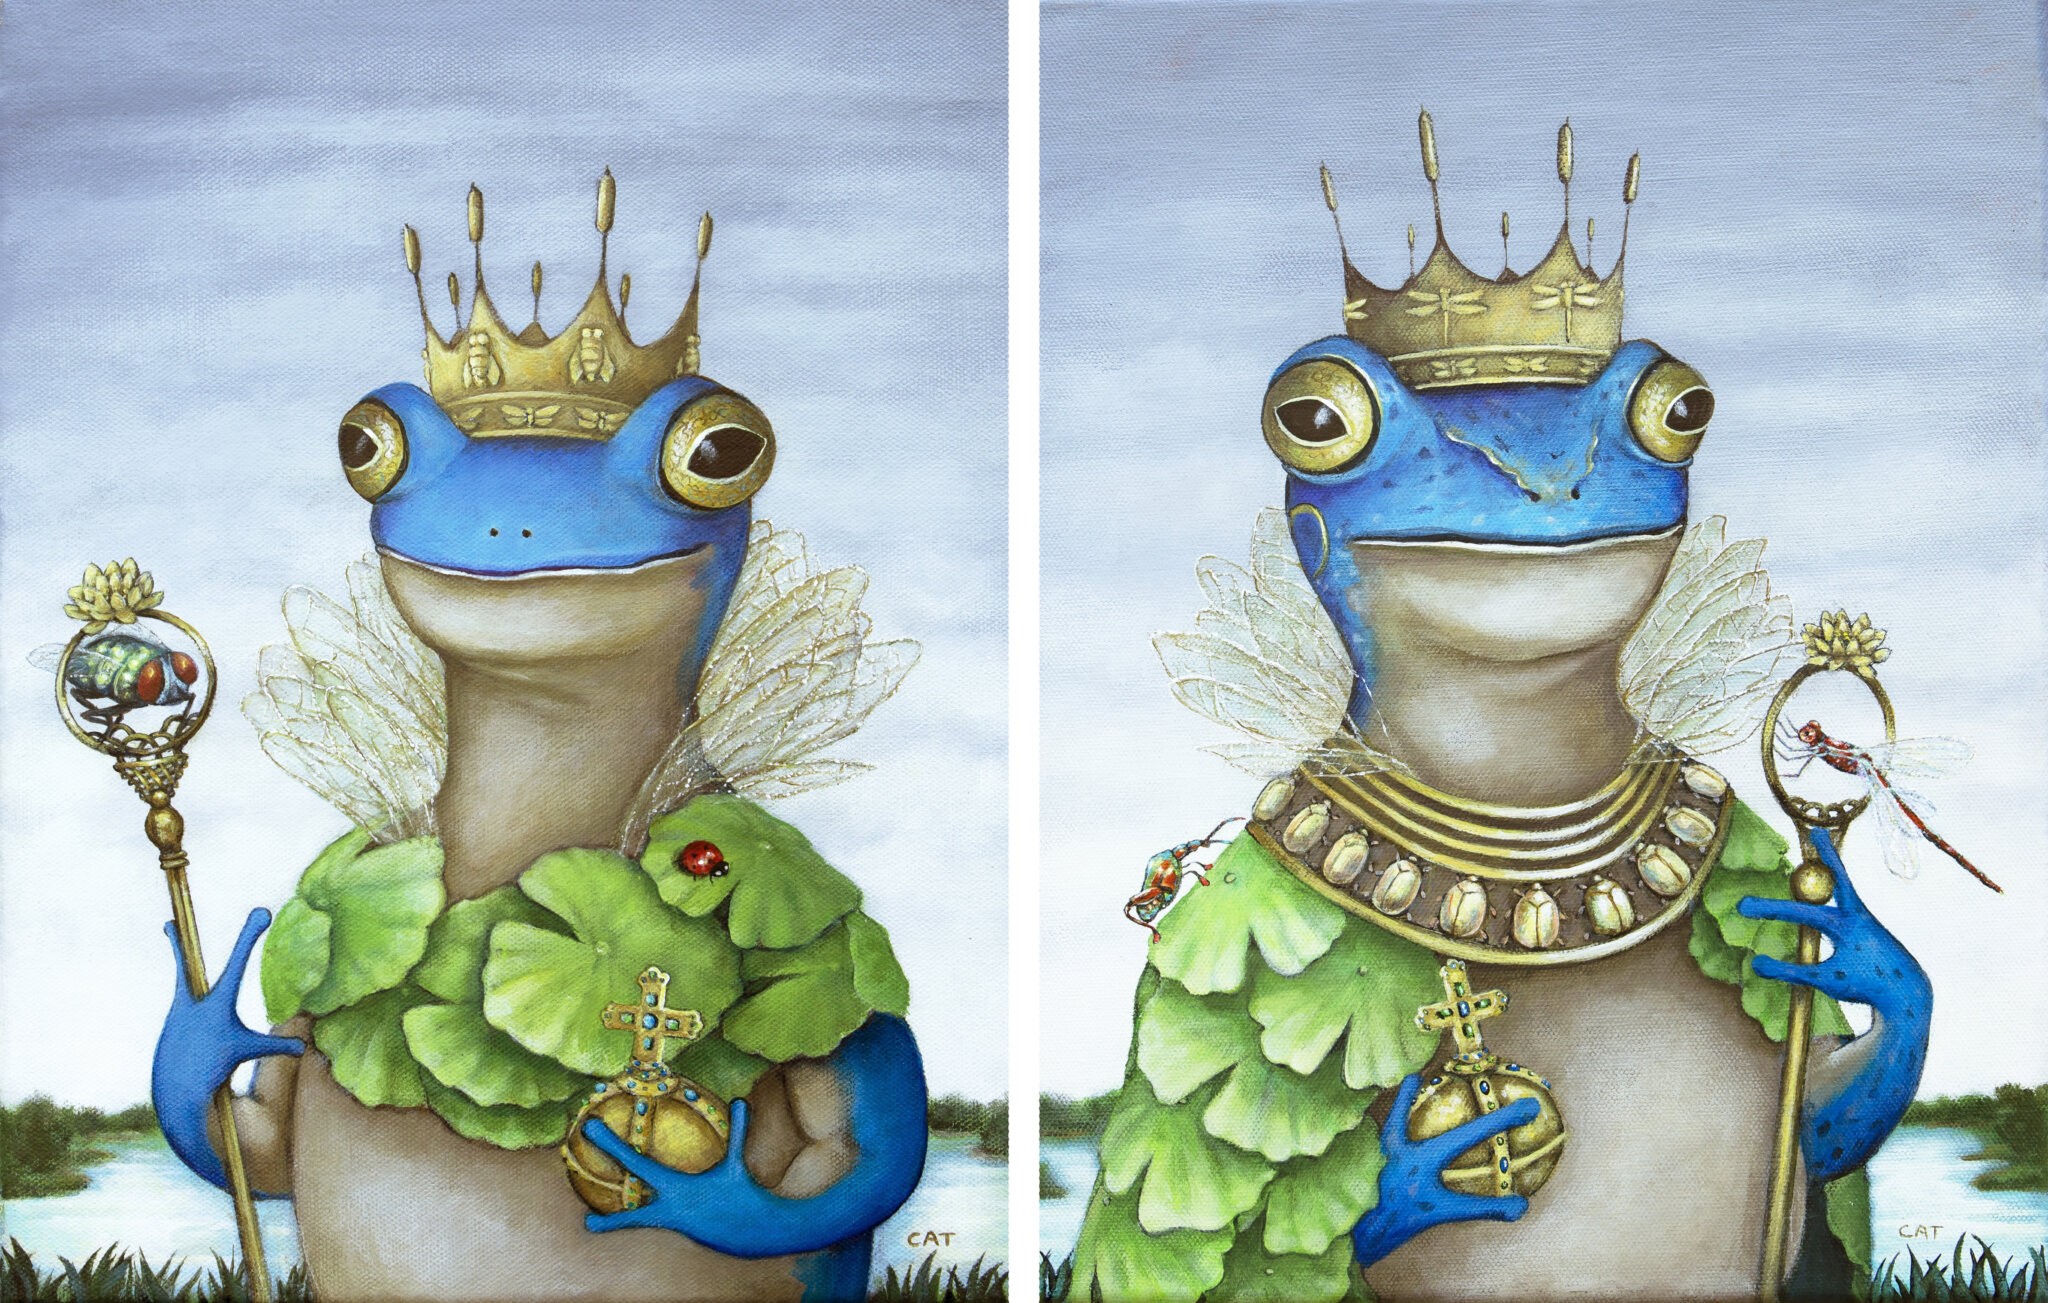 "The Queen of Poxabogue" (acrylic, 11" x 14") and "The King of Poxabogue" (acrylic, 11" x 14") by Cat Bachman